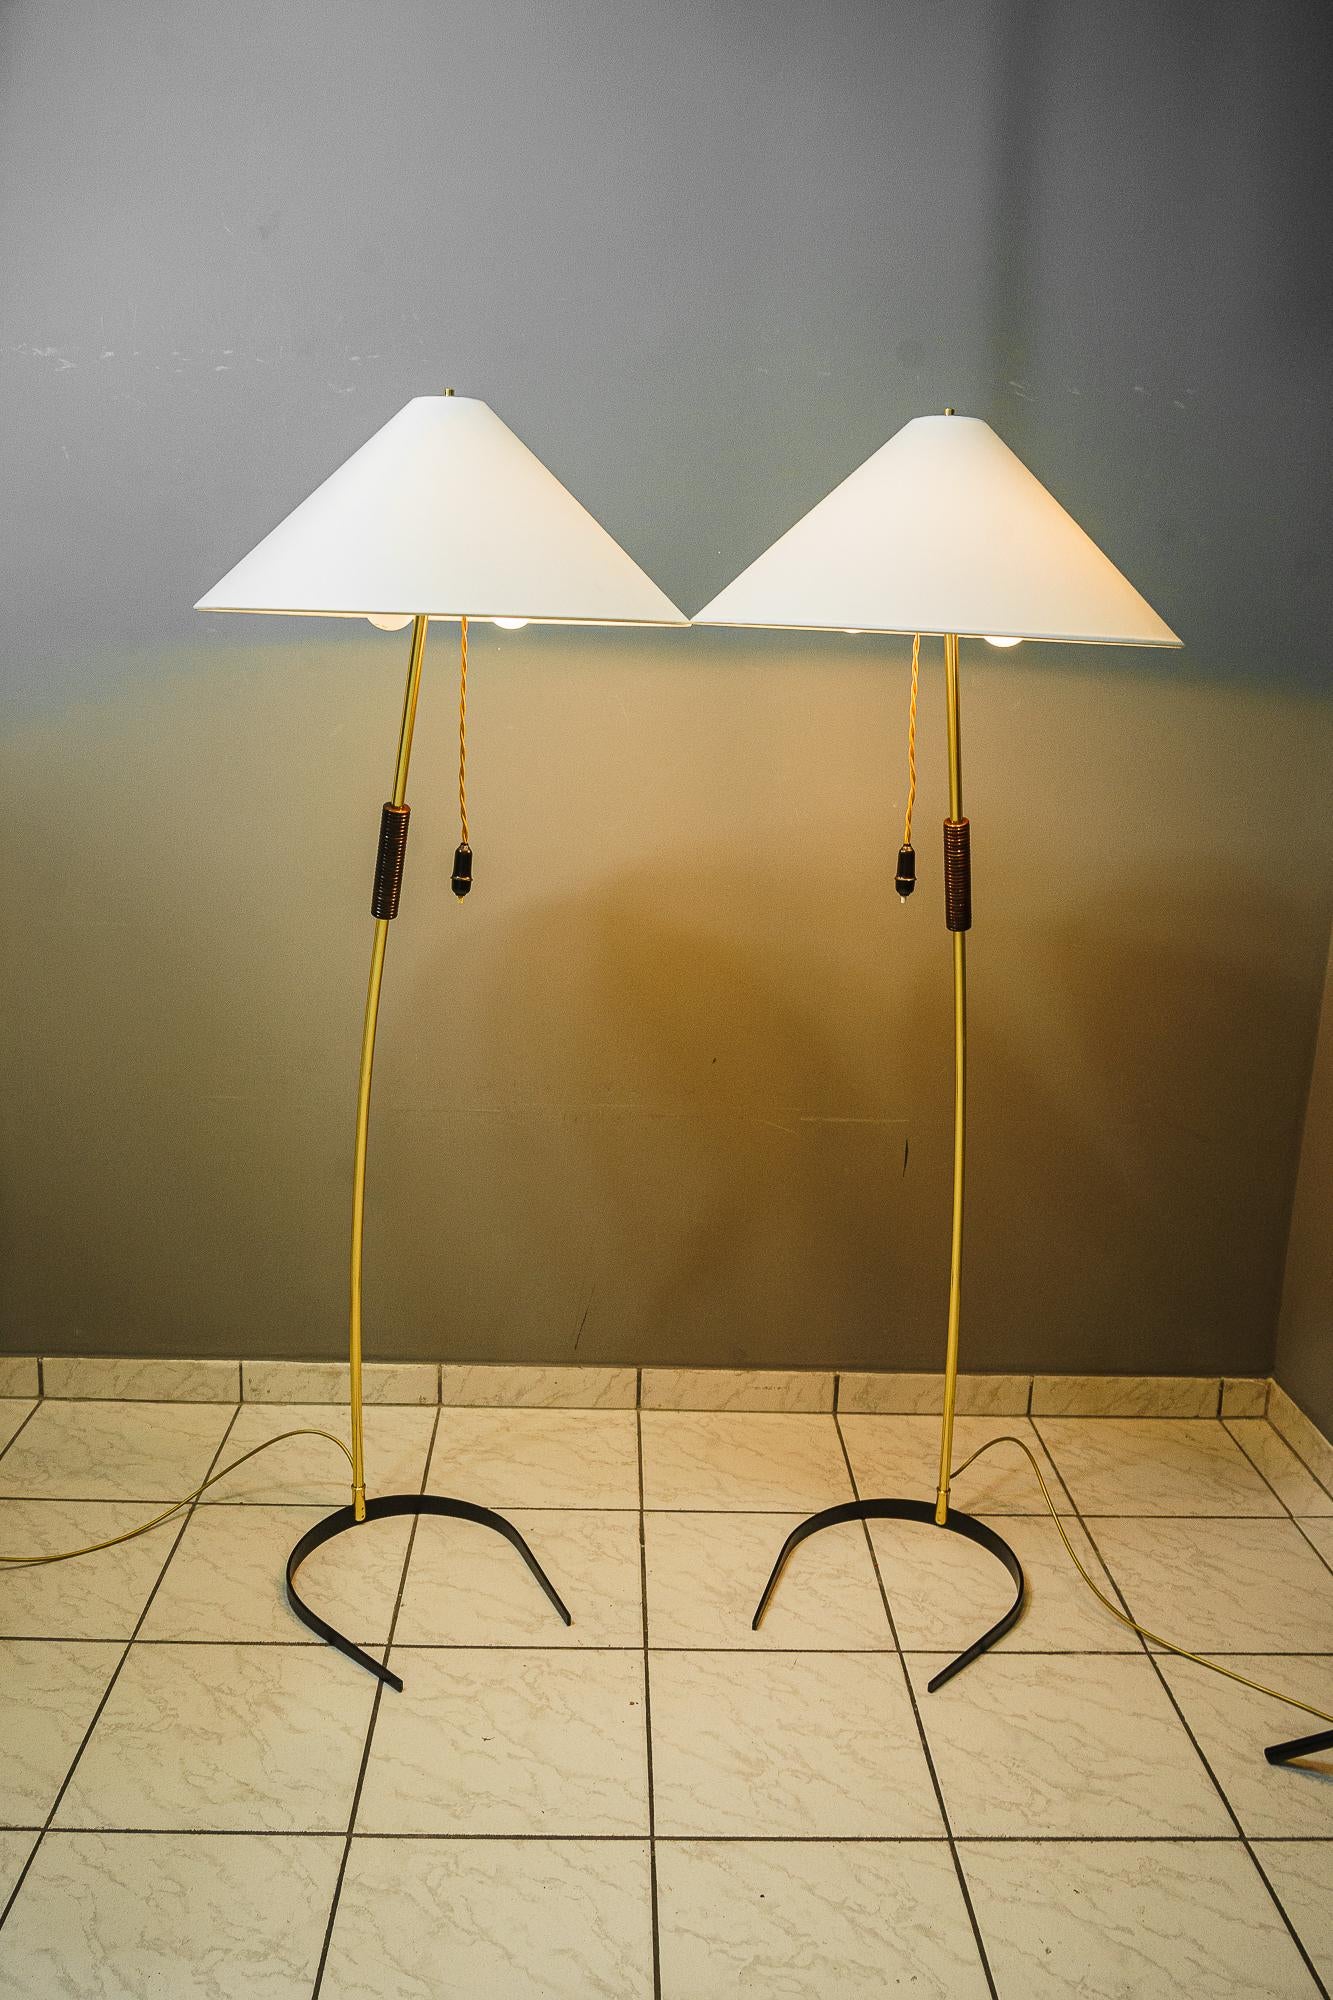 2x Rupert Nikoll Floor Lamps with Wood Handle, circa 1950s For Sale 6